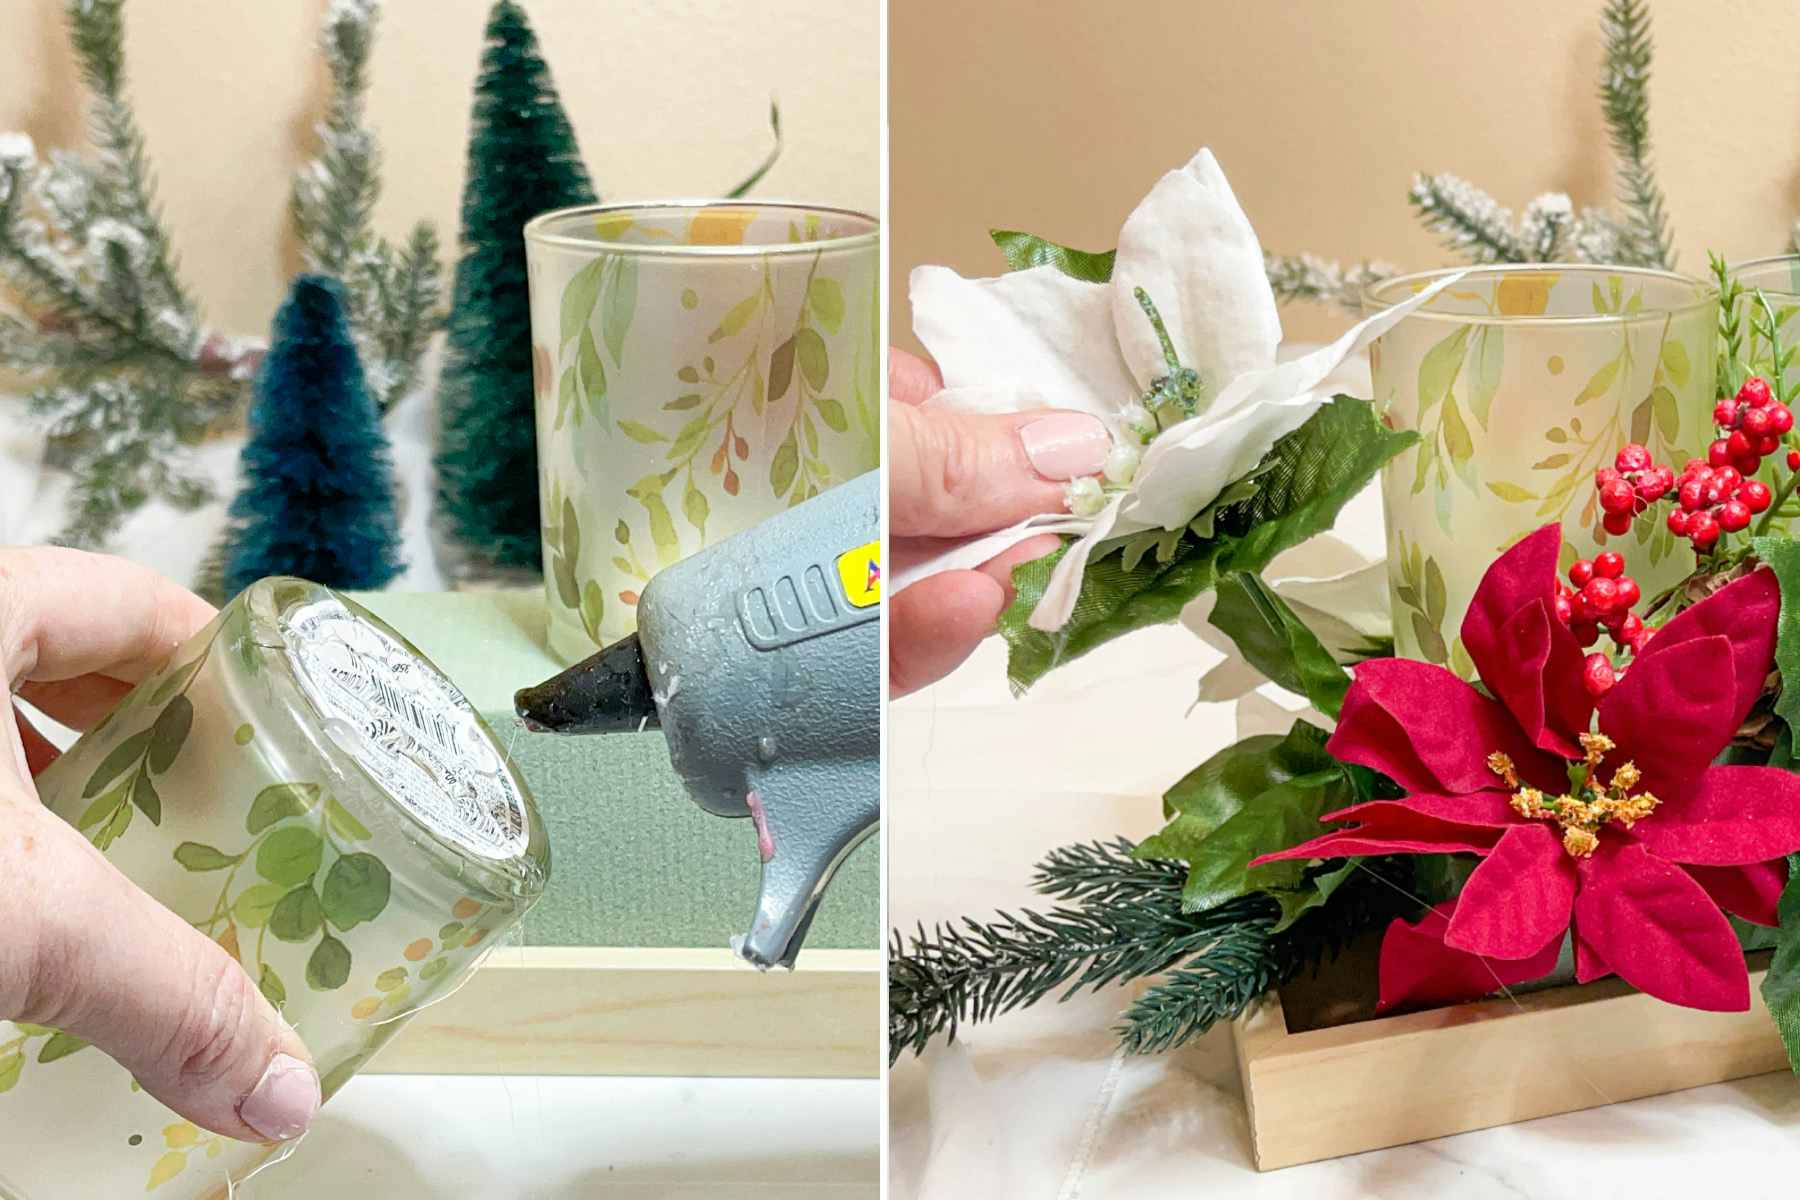 two images side by side of a person gluing votives and placing faux flowers into a centerpiece 